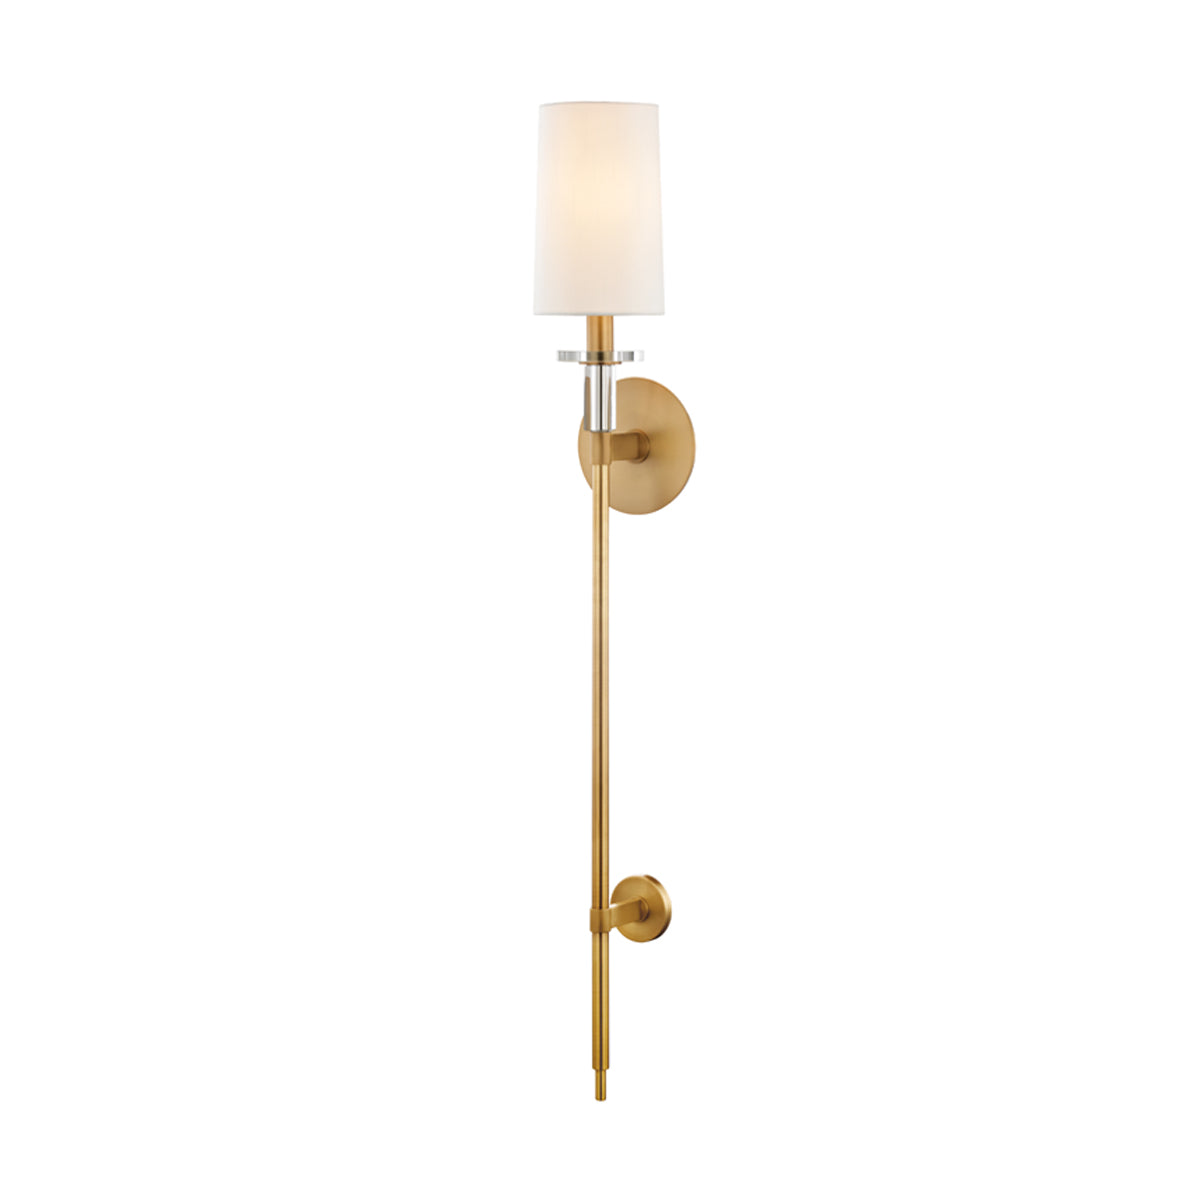 AMHERST 1 LIGHT WALL SCONCE